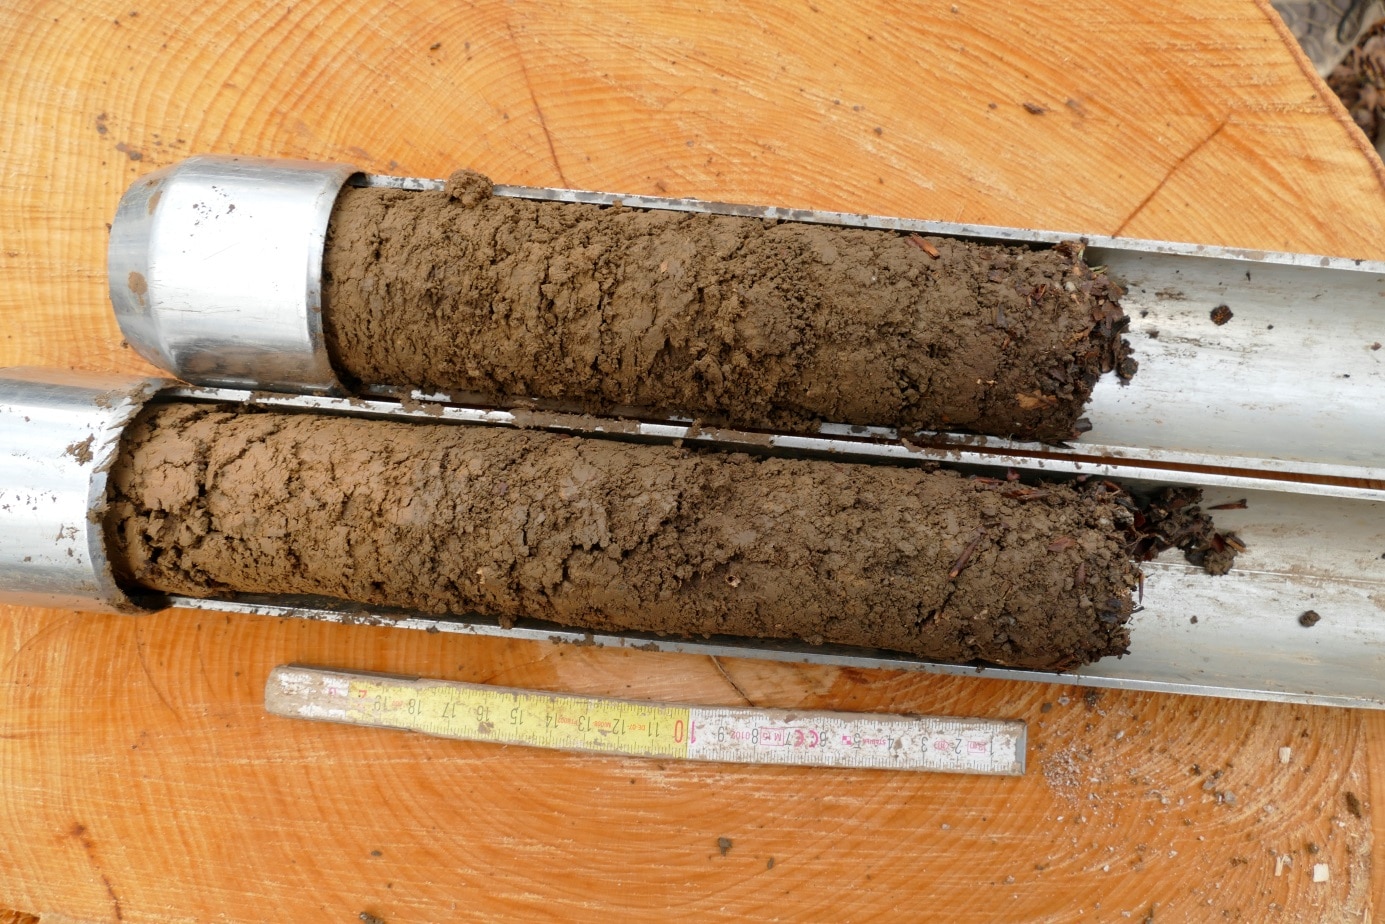 Picture: The photo shows two metal cylinders lying on a tree stump, which are used for taking soil samples. The cylinders are closed all around only at one end and are otherwise open halfway along their length. The cylinders contain soil samples of brown soil ranging in length from twenty to twenty-five centimetres. A folding rule is lying next to the cylinders for estimating the length.